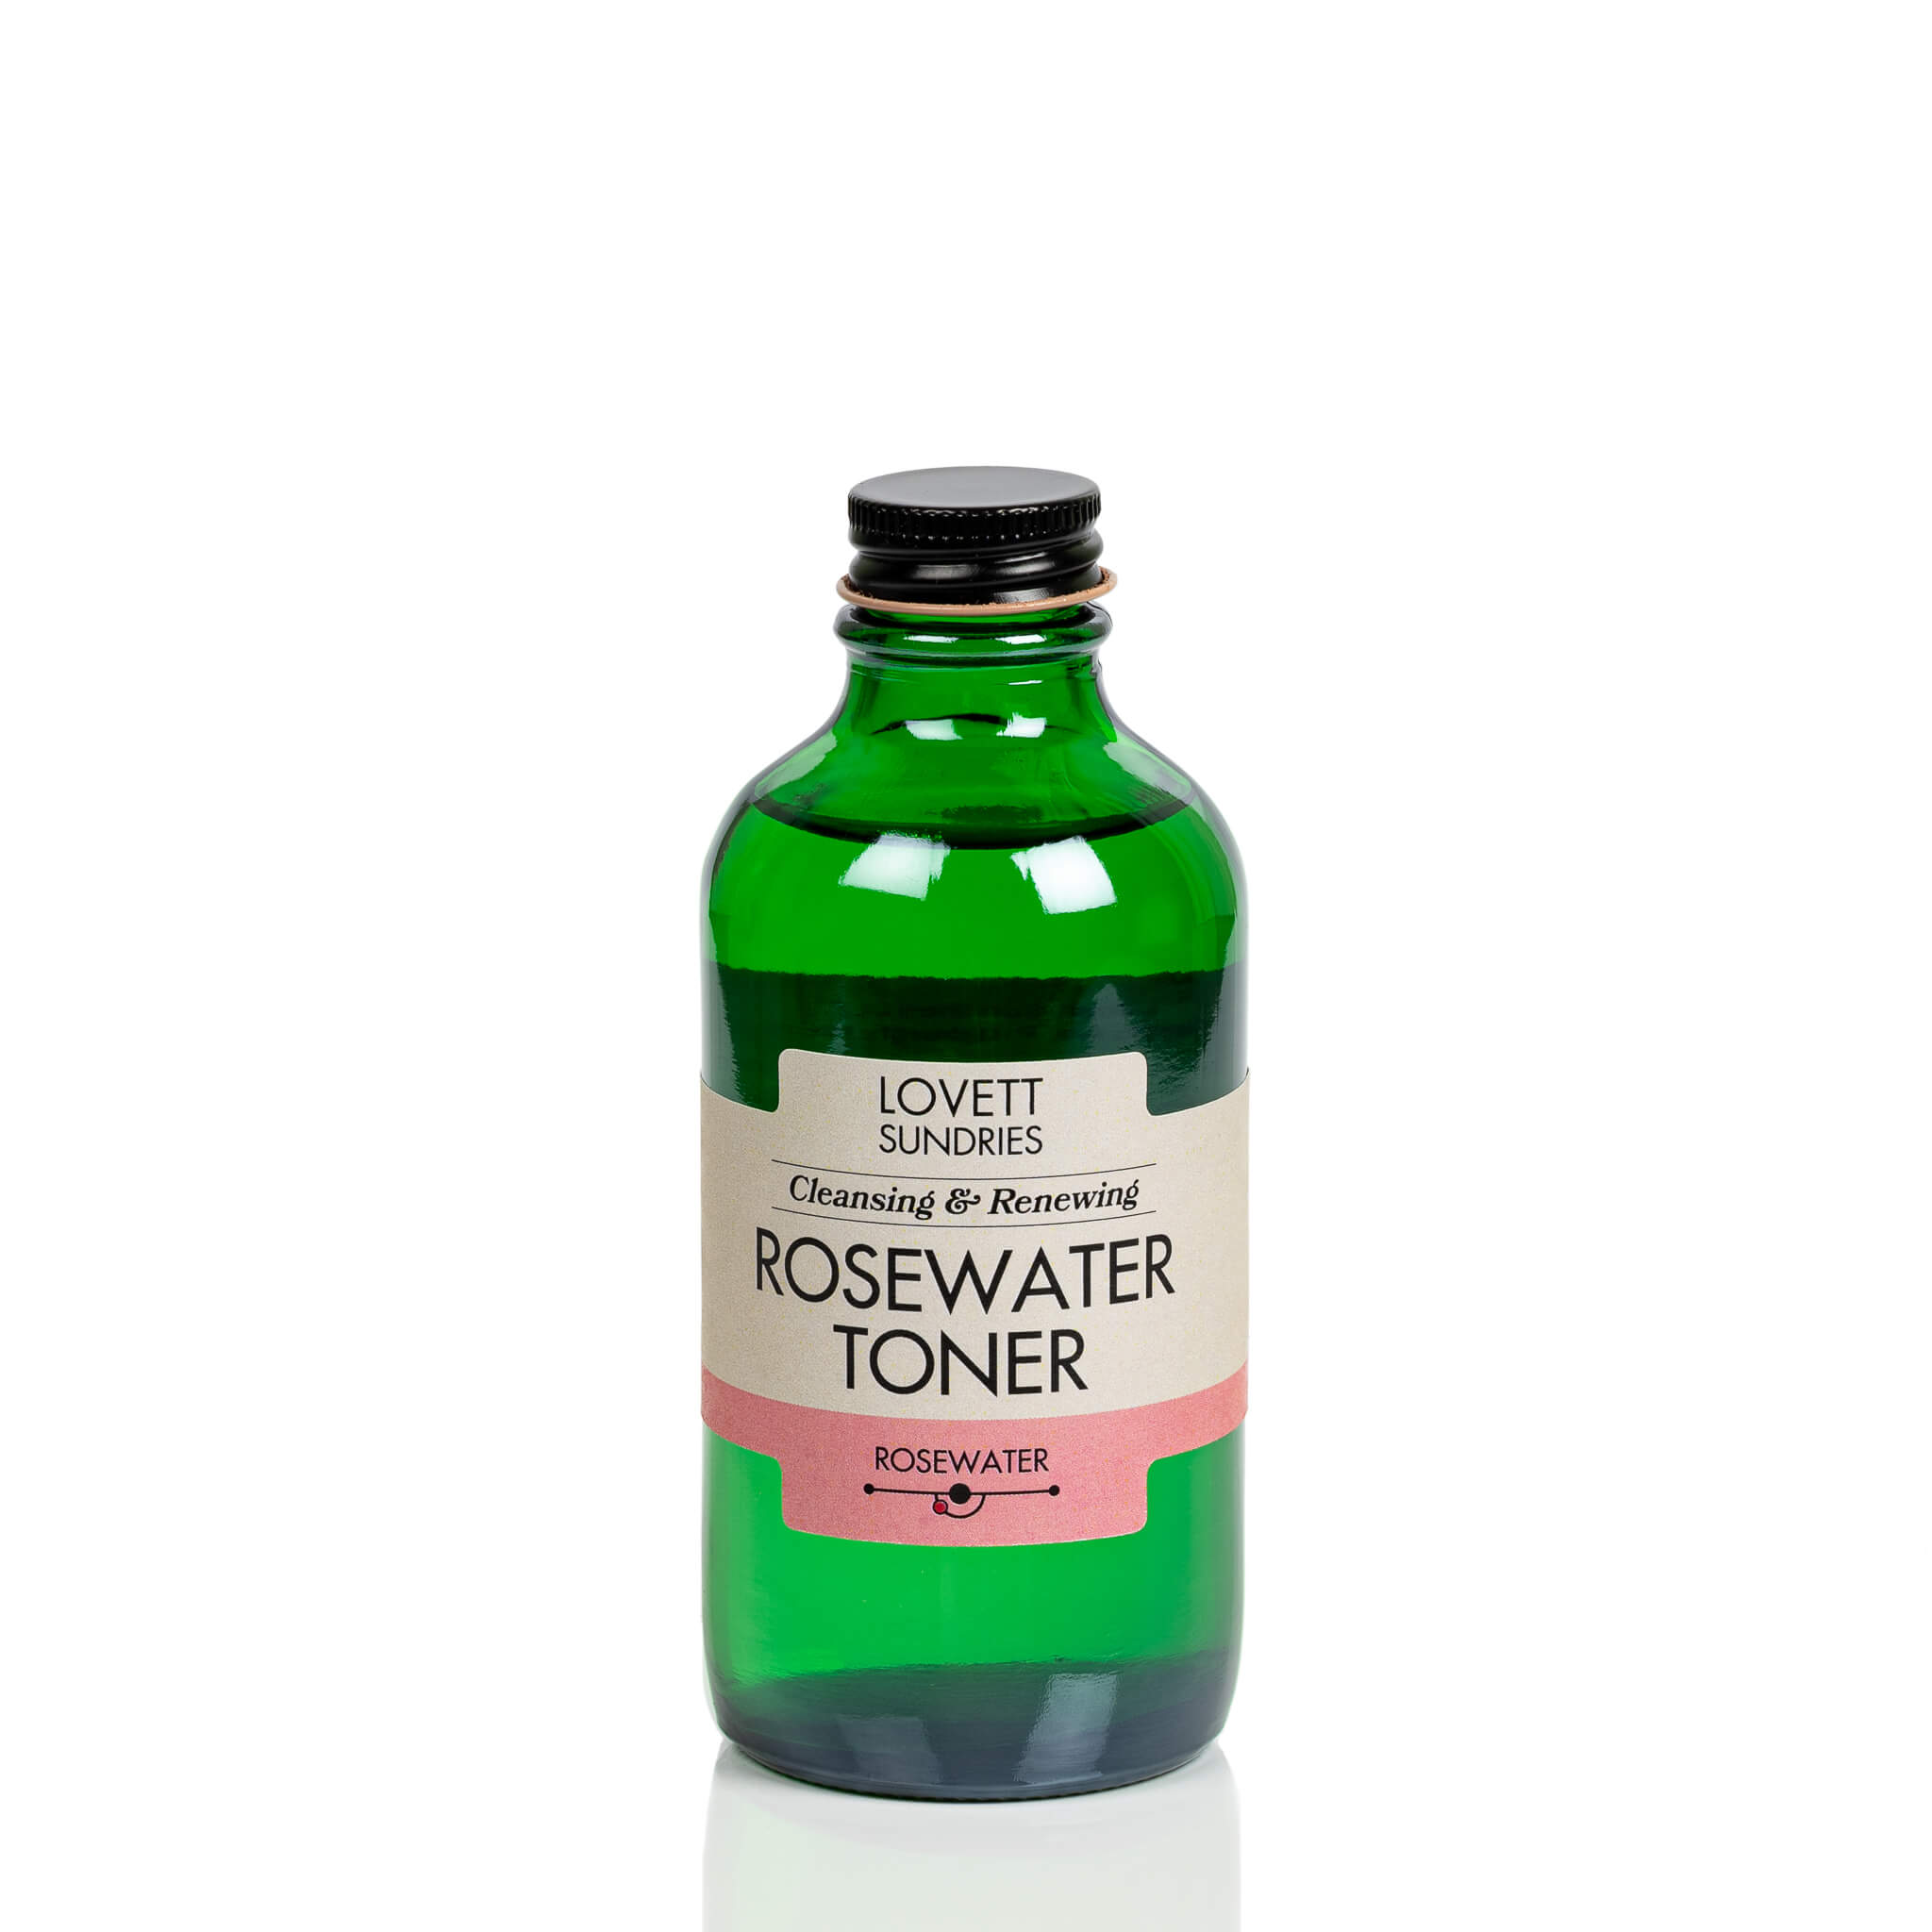 All natural cleansing and renewing rose water toner in a green glass bottle with a screw top lid. 